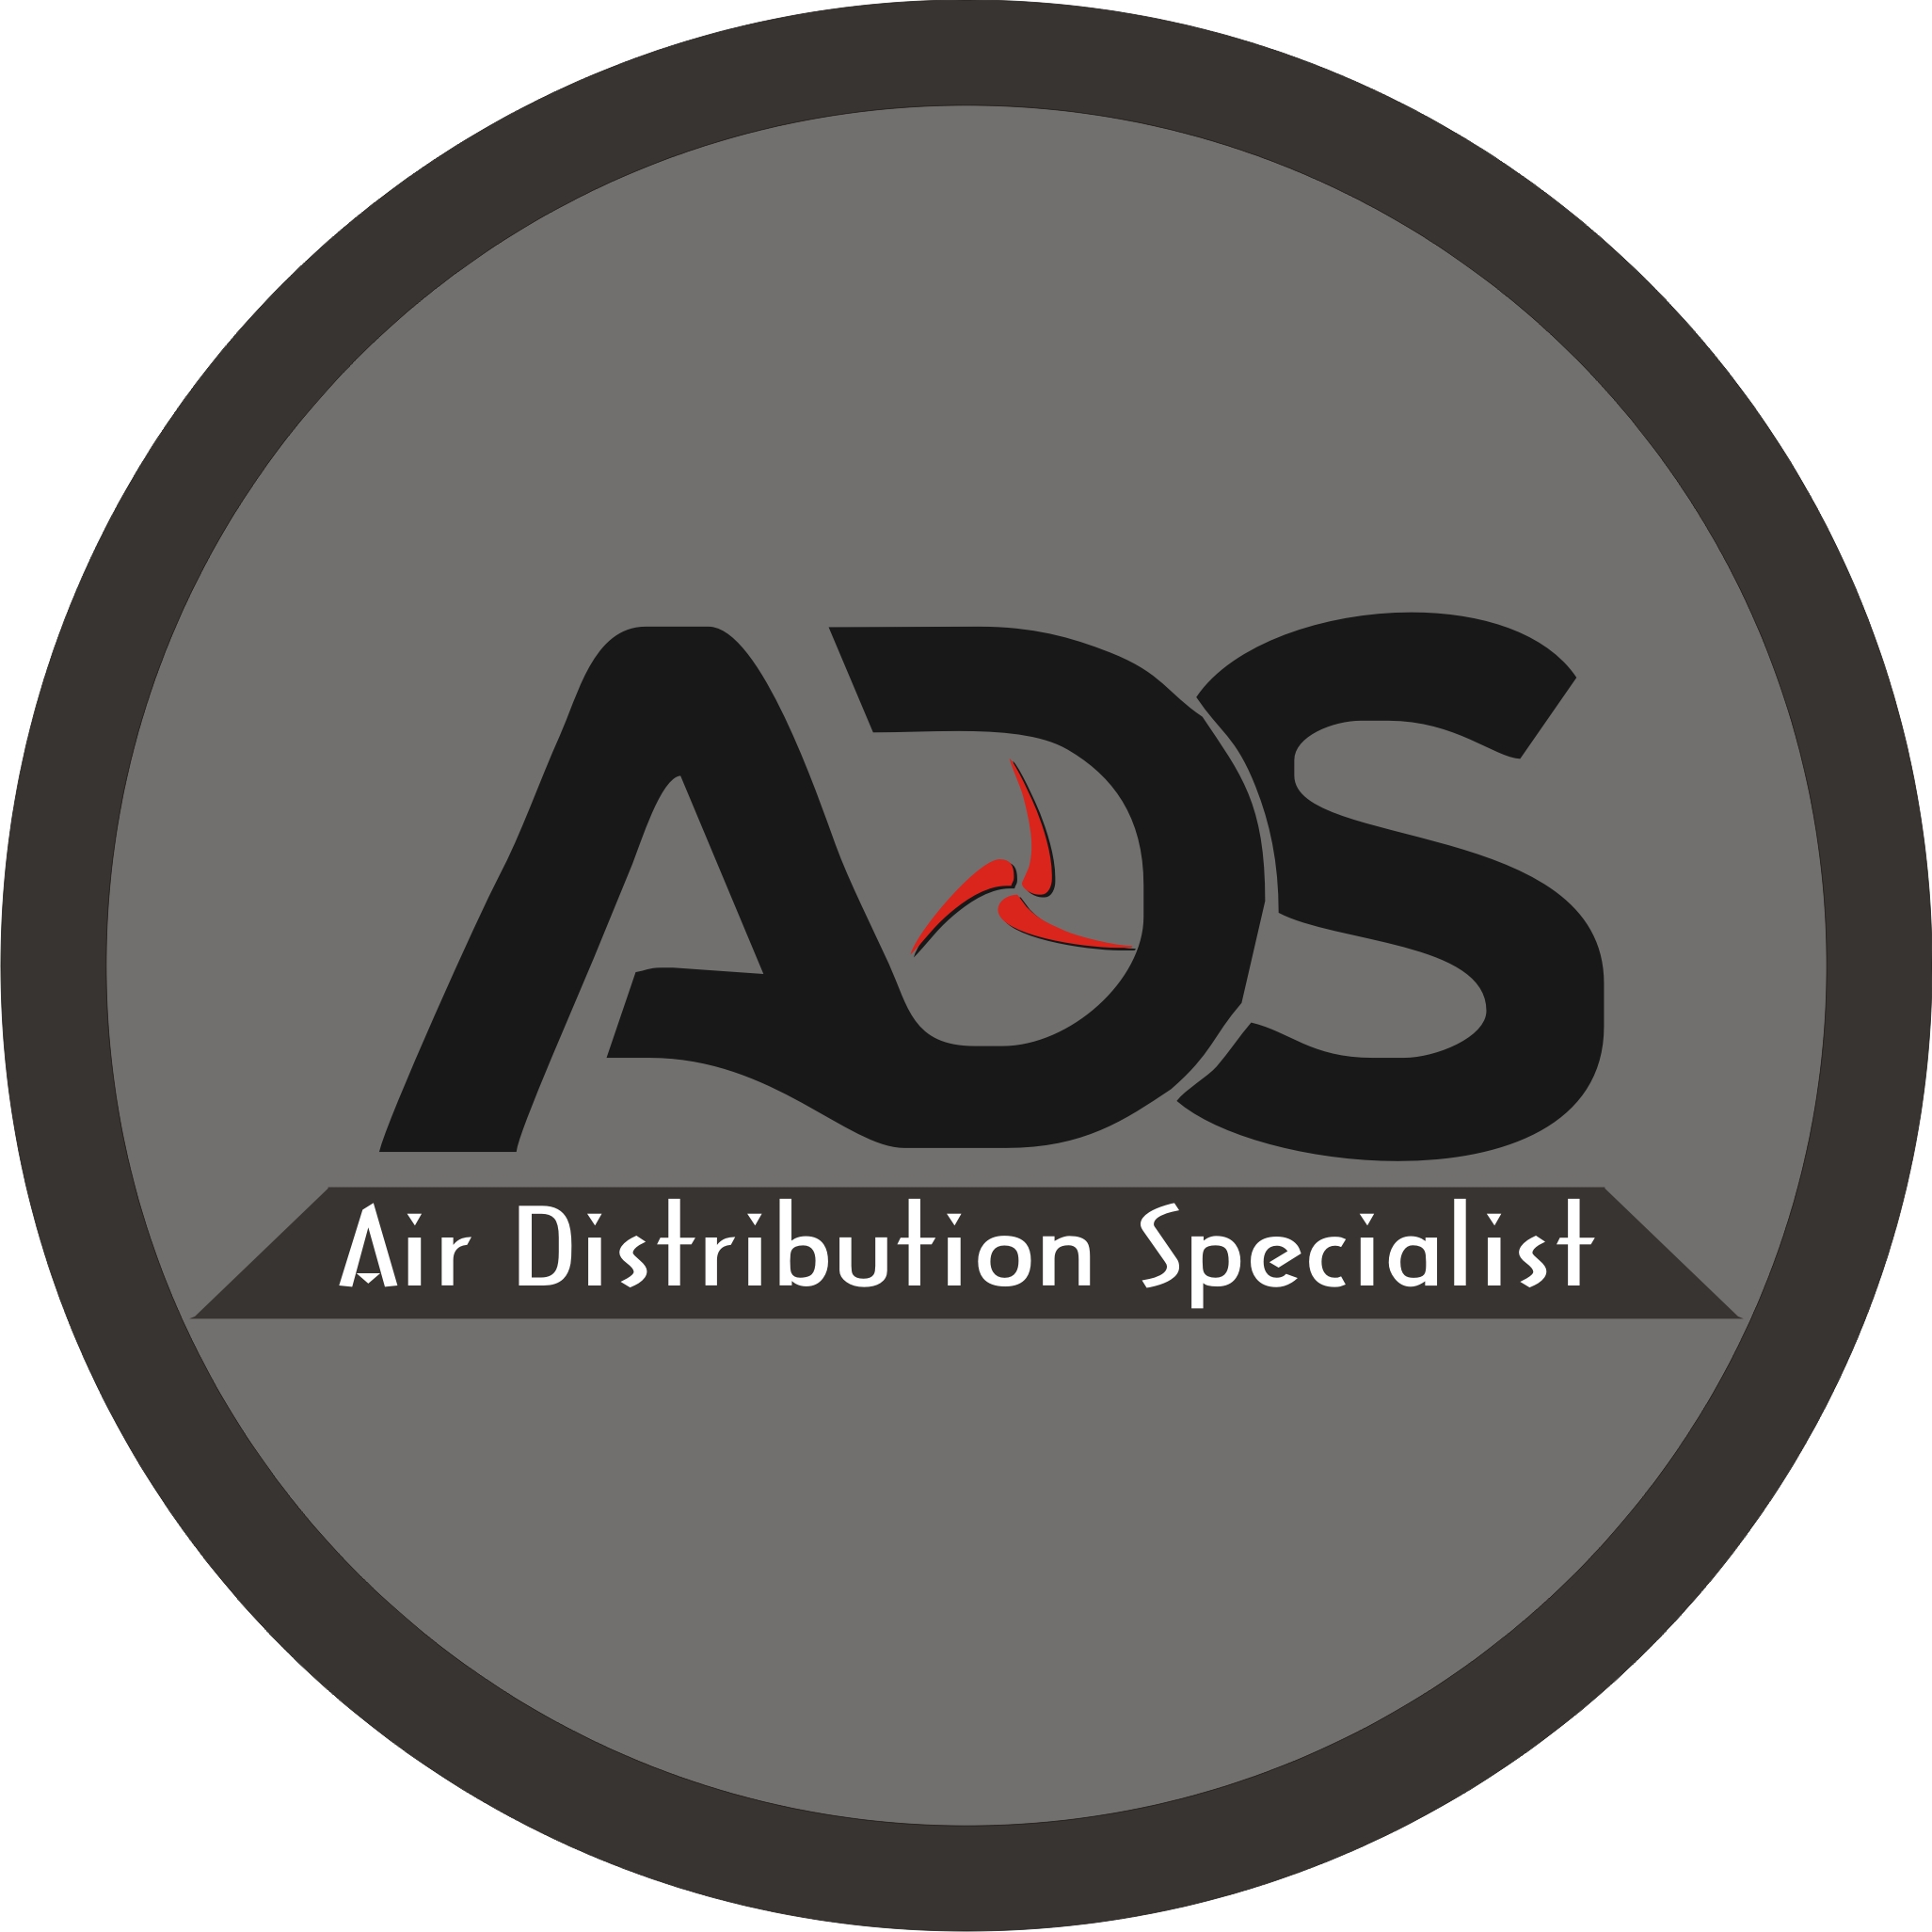 AIR DISTRIBUTION SPECIALIST (ADS)